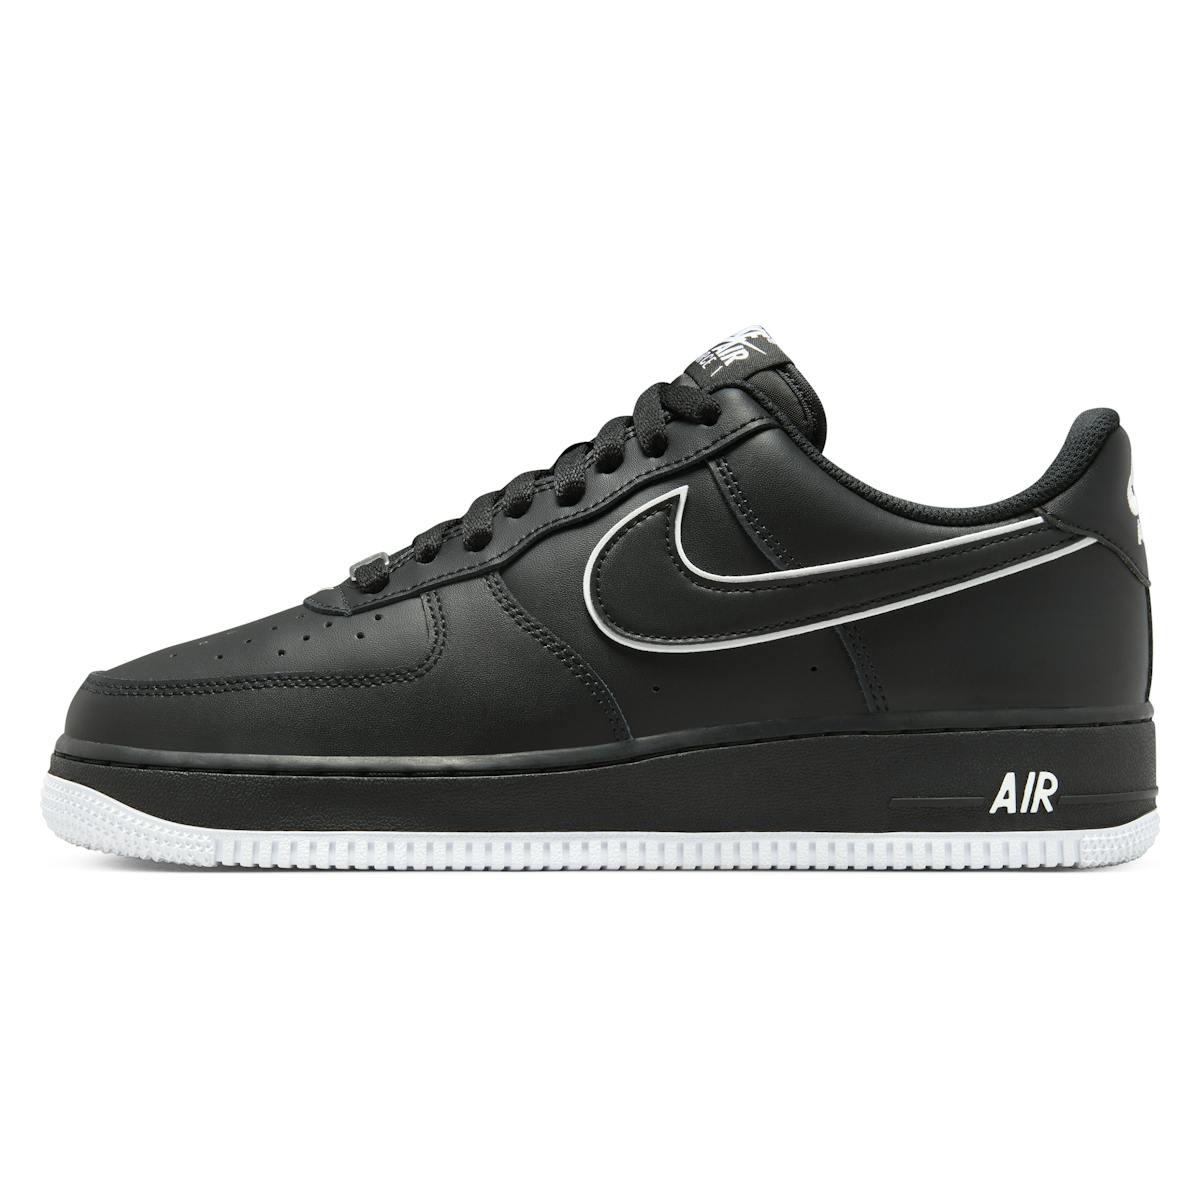 Nike Air Force 1 Low "Outline Black White"